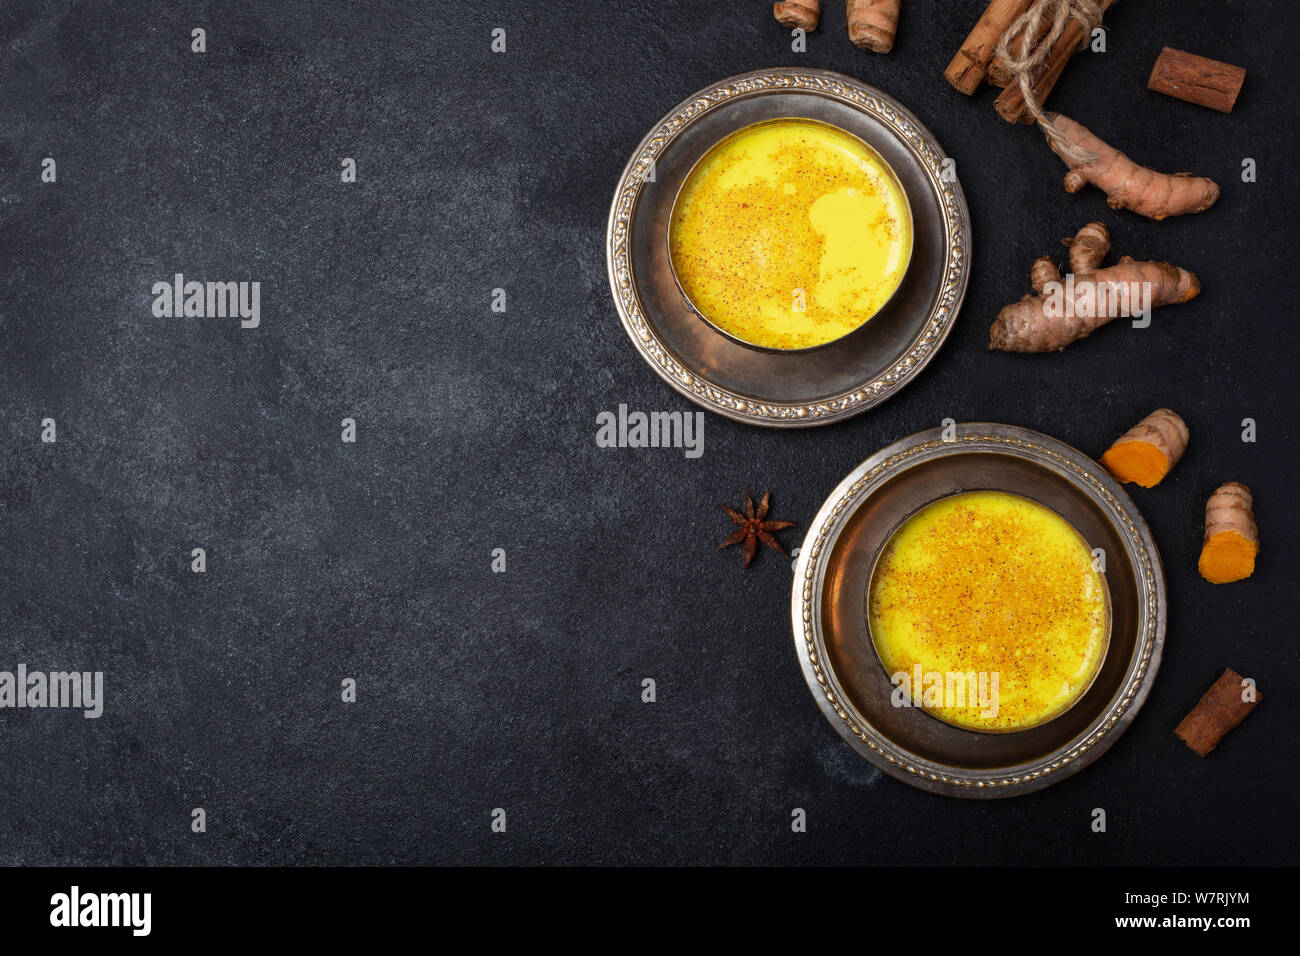 Golden turmeric milk on the black background with ingredients Stock Photo